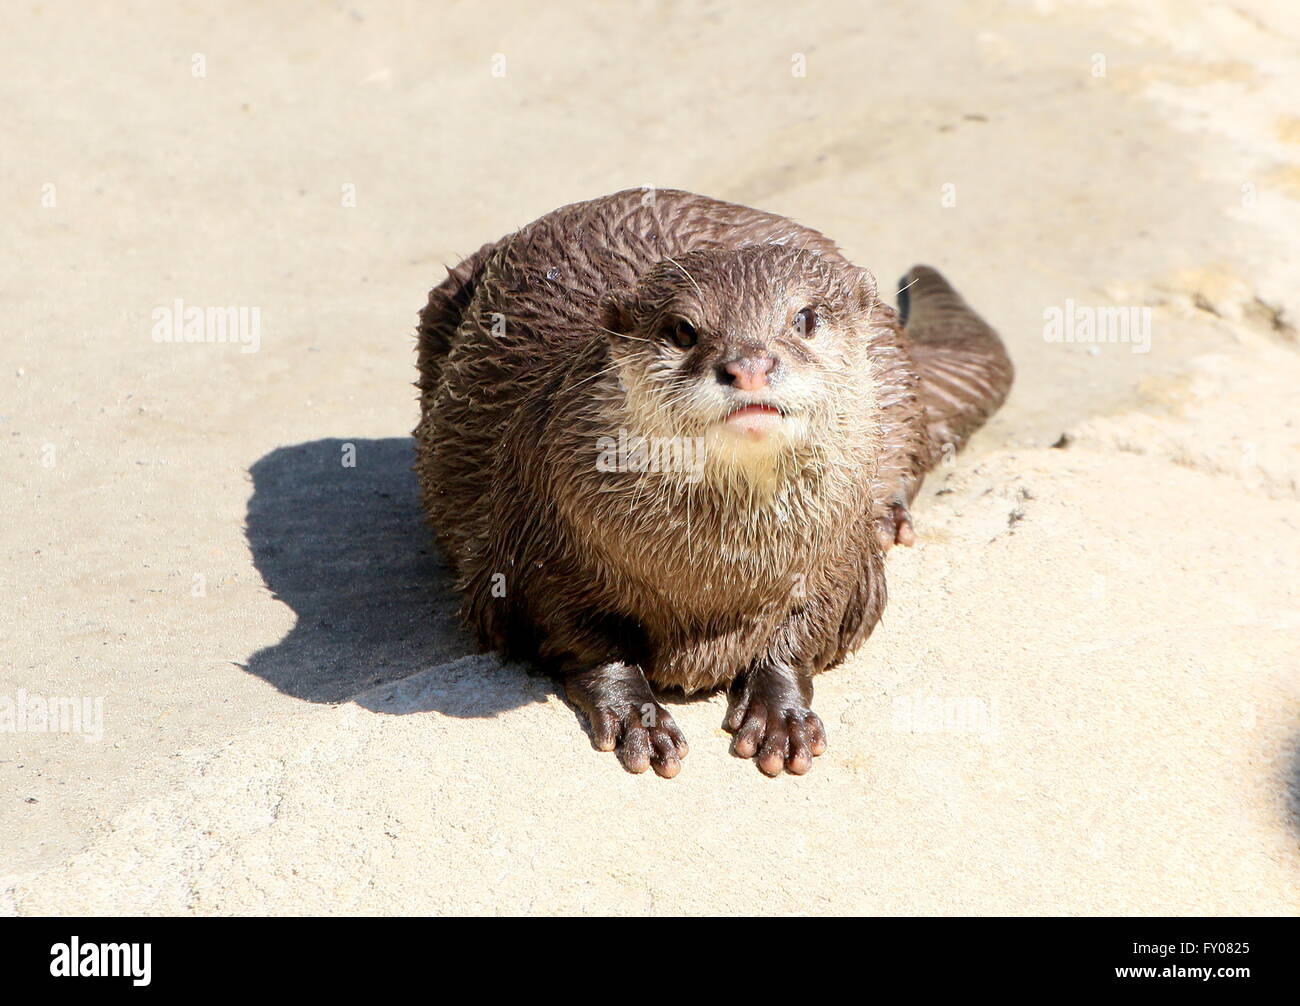 Oriental or Asian small clawed otter (Aonyx cinereus) facing the camera, looking displeased Stock Photo